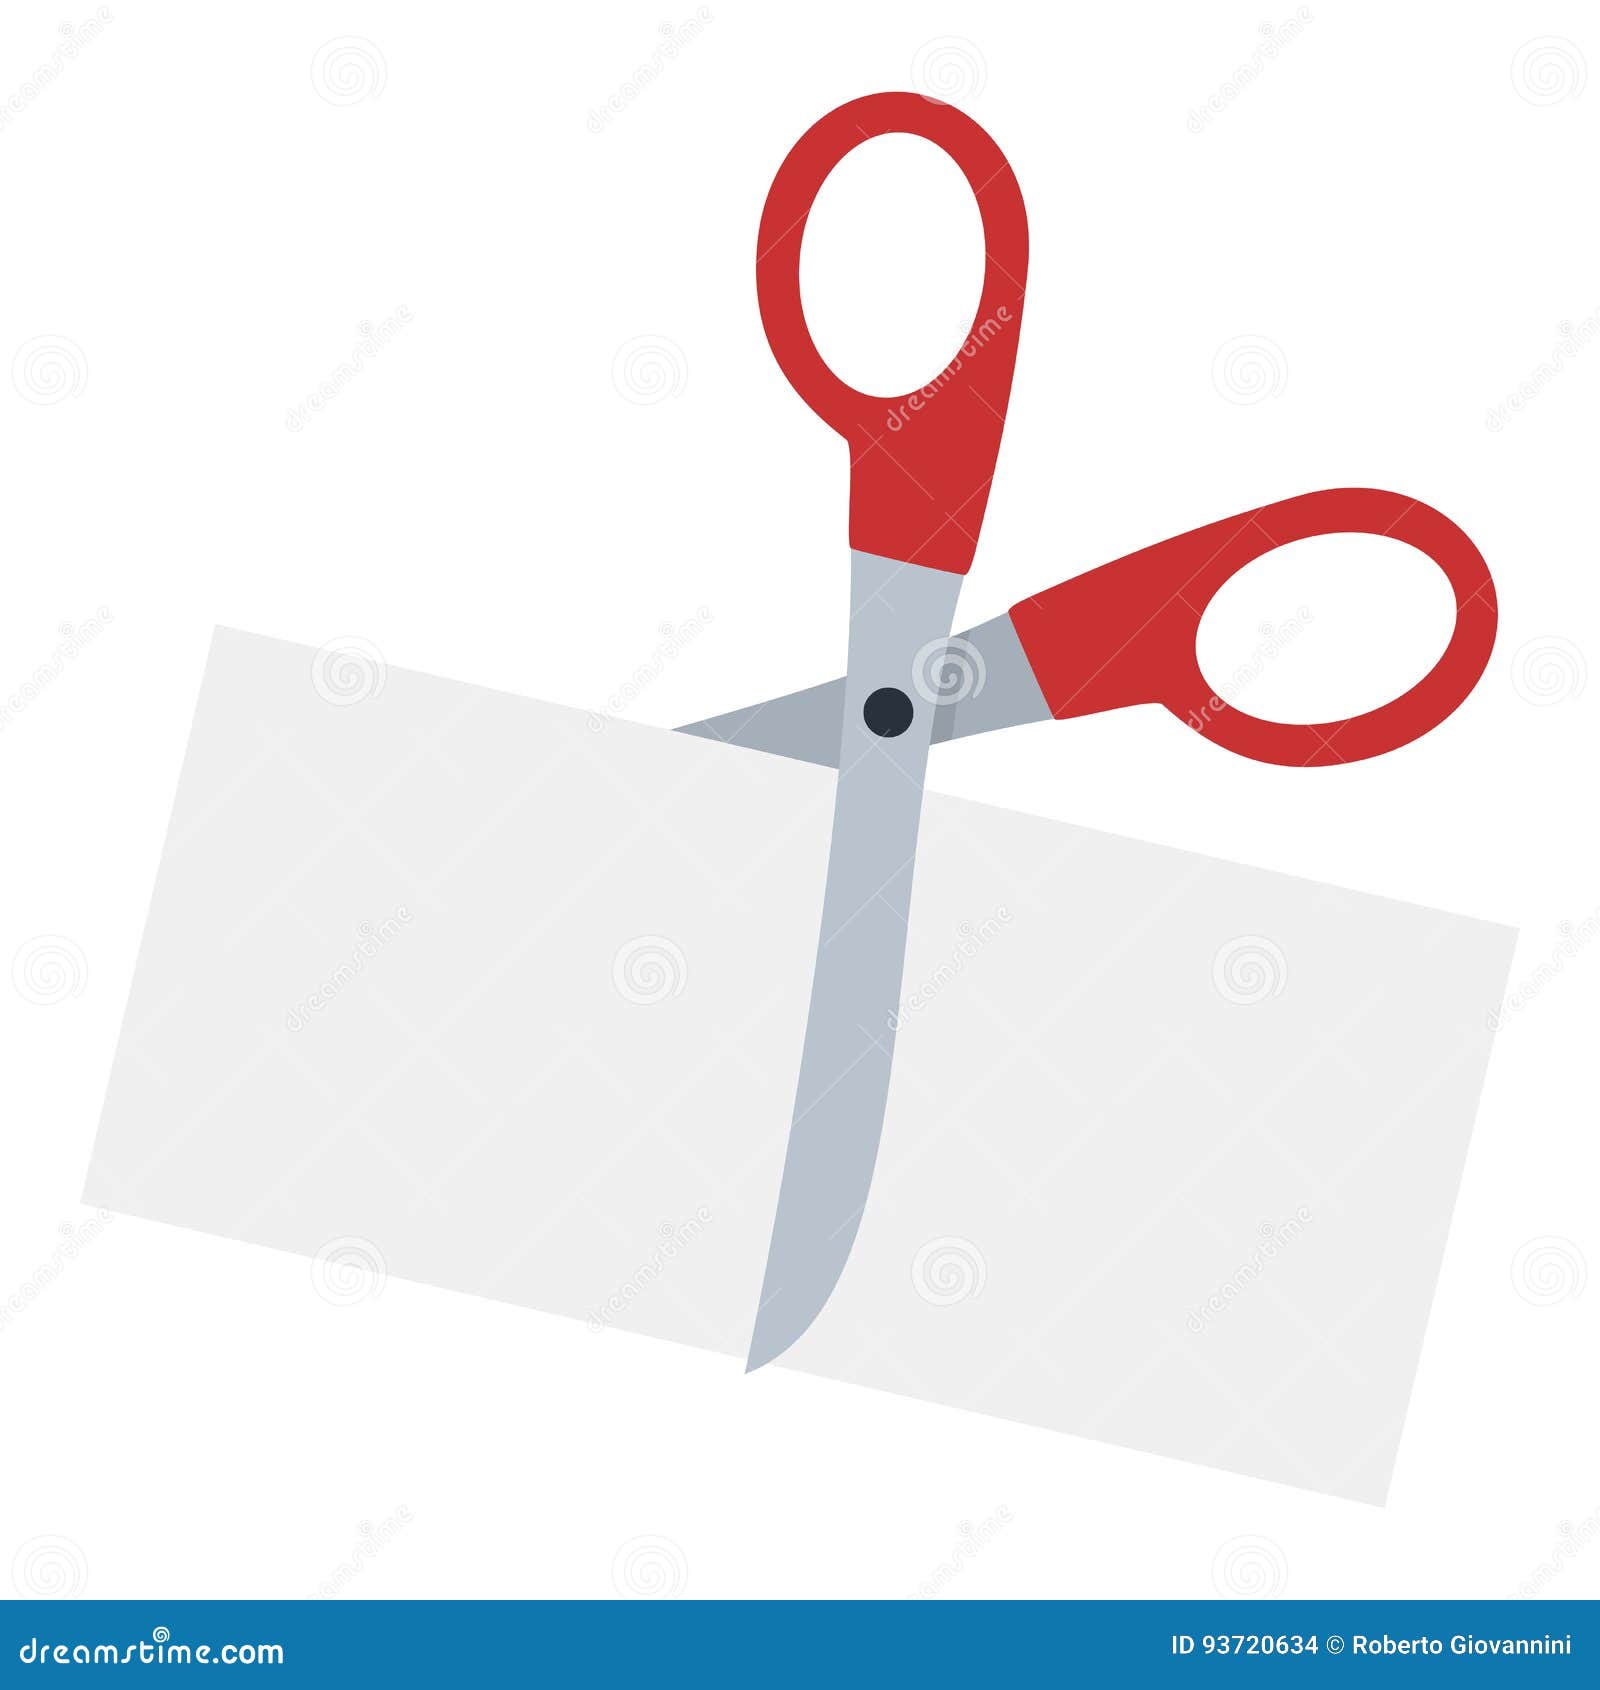 scissors cutting paper flat icon on white